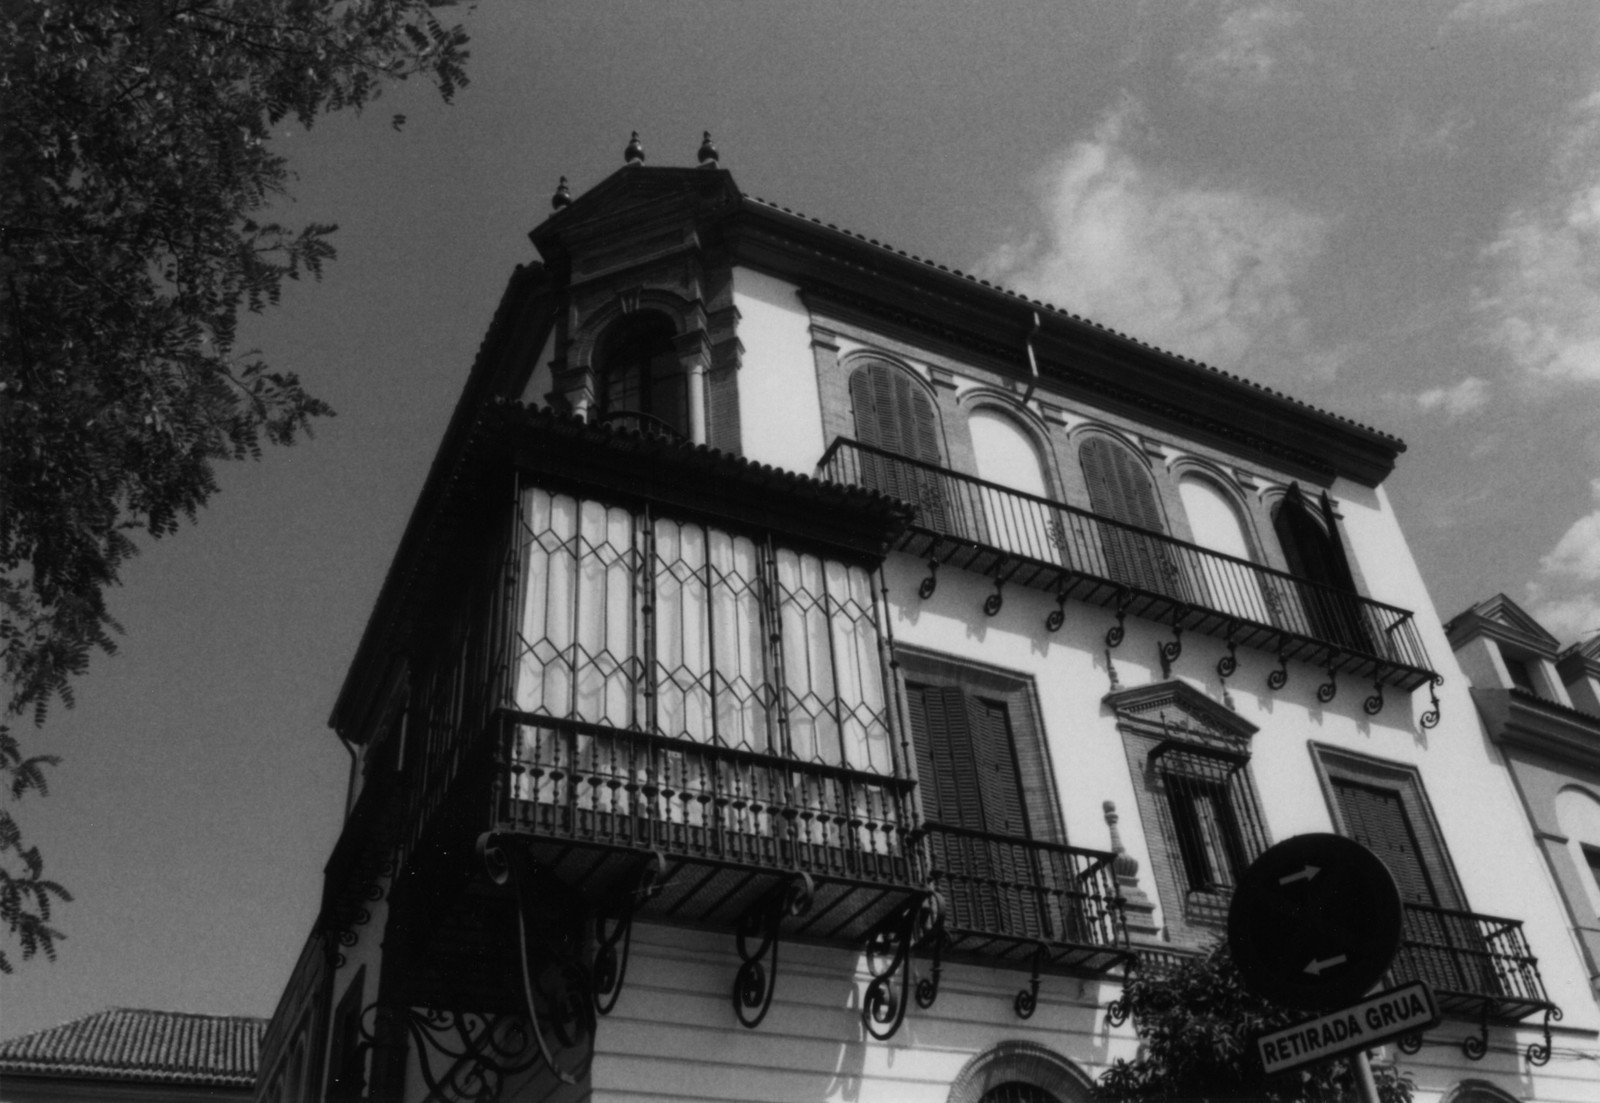 black and white po of a historic building with balconies and wrought iron railings